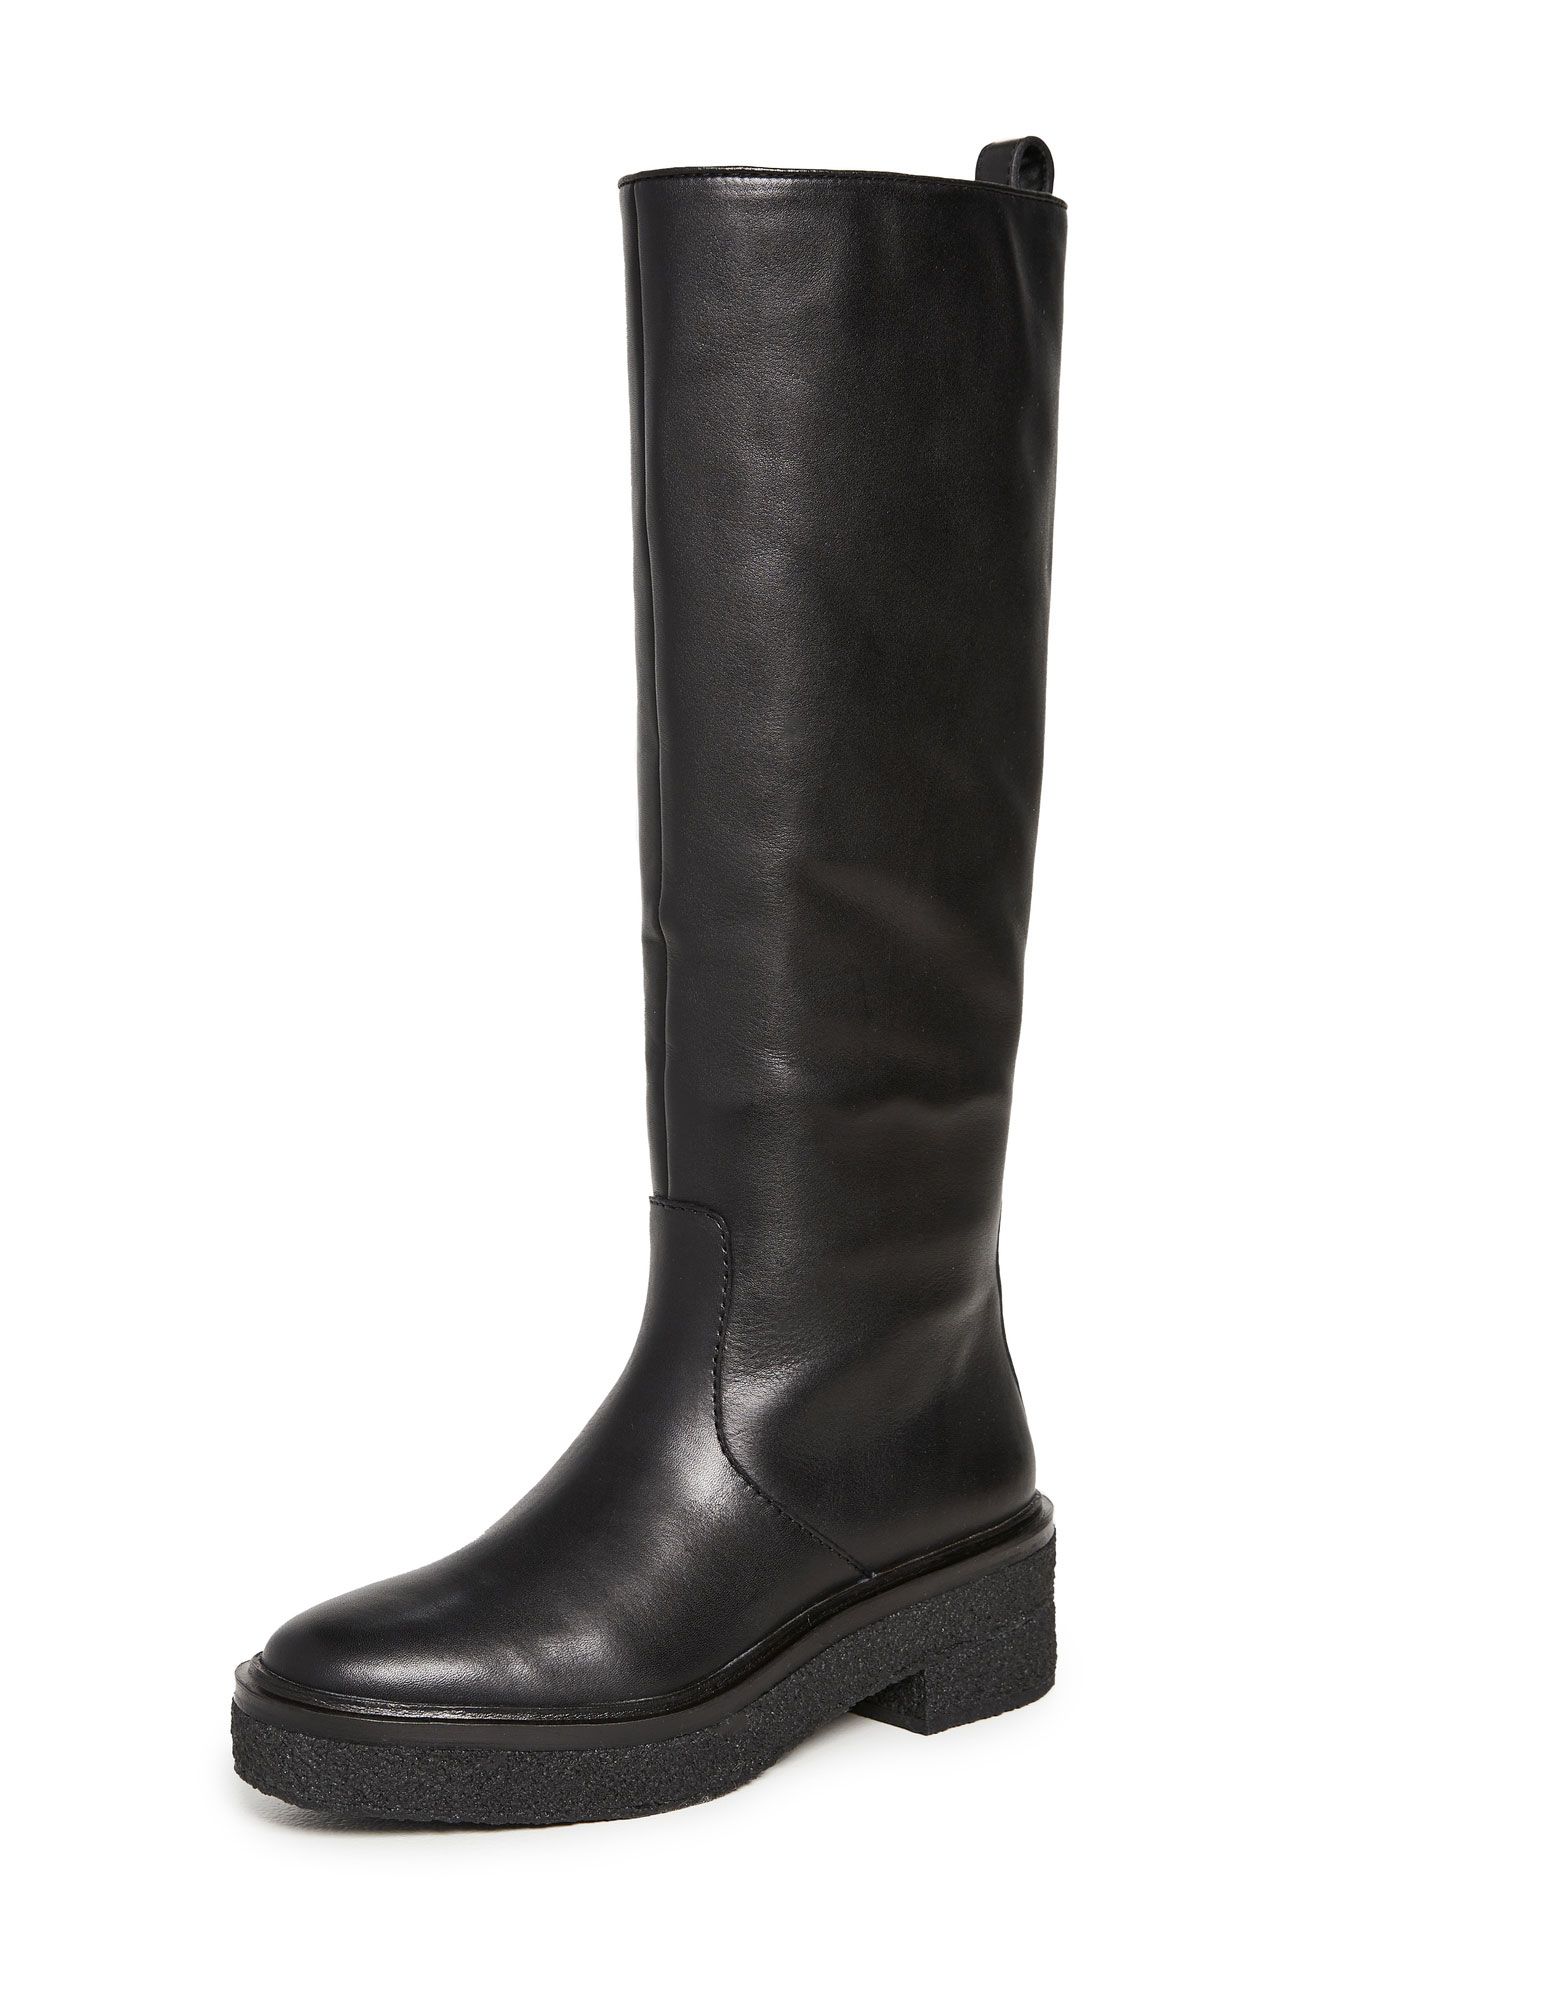 39 New Knee-High Boots to Wear With Skinny Jeans | Who What Wear